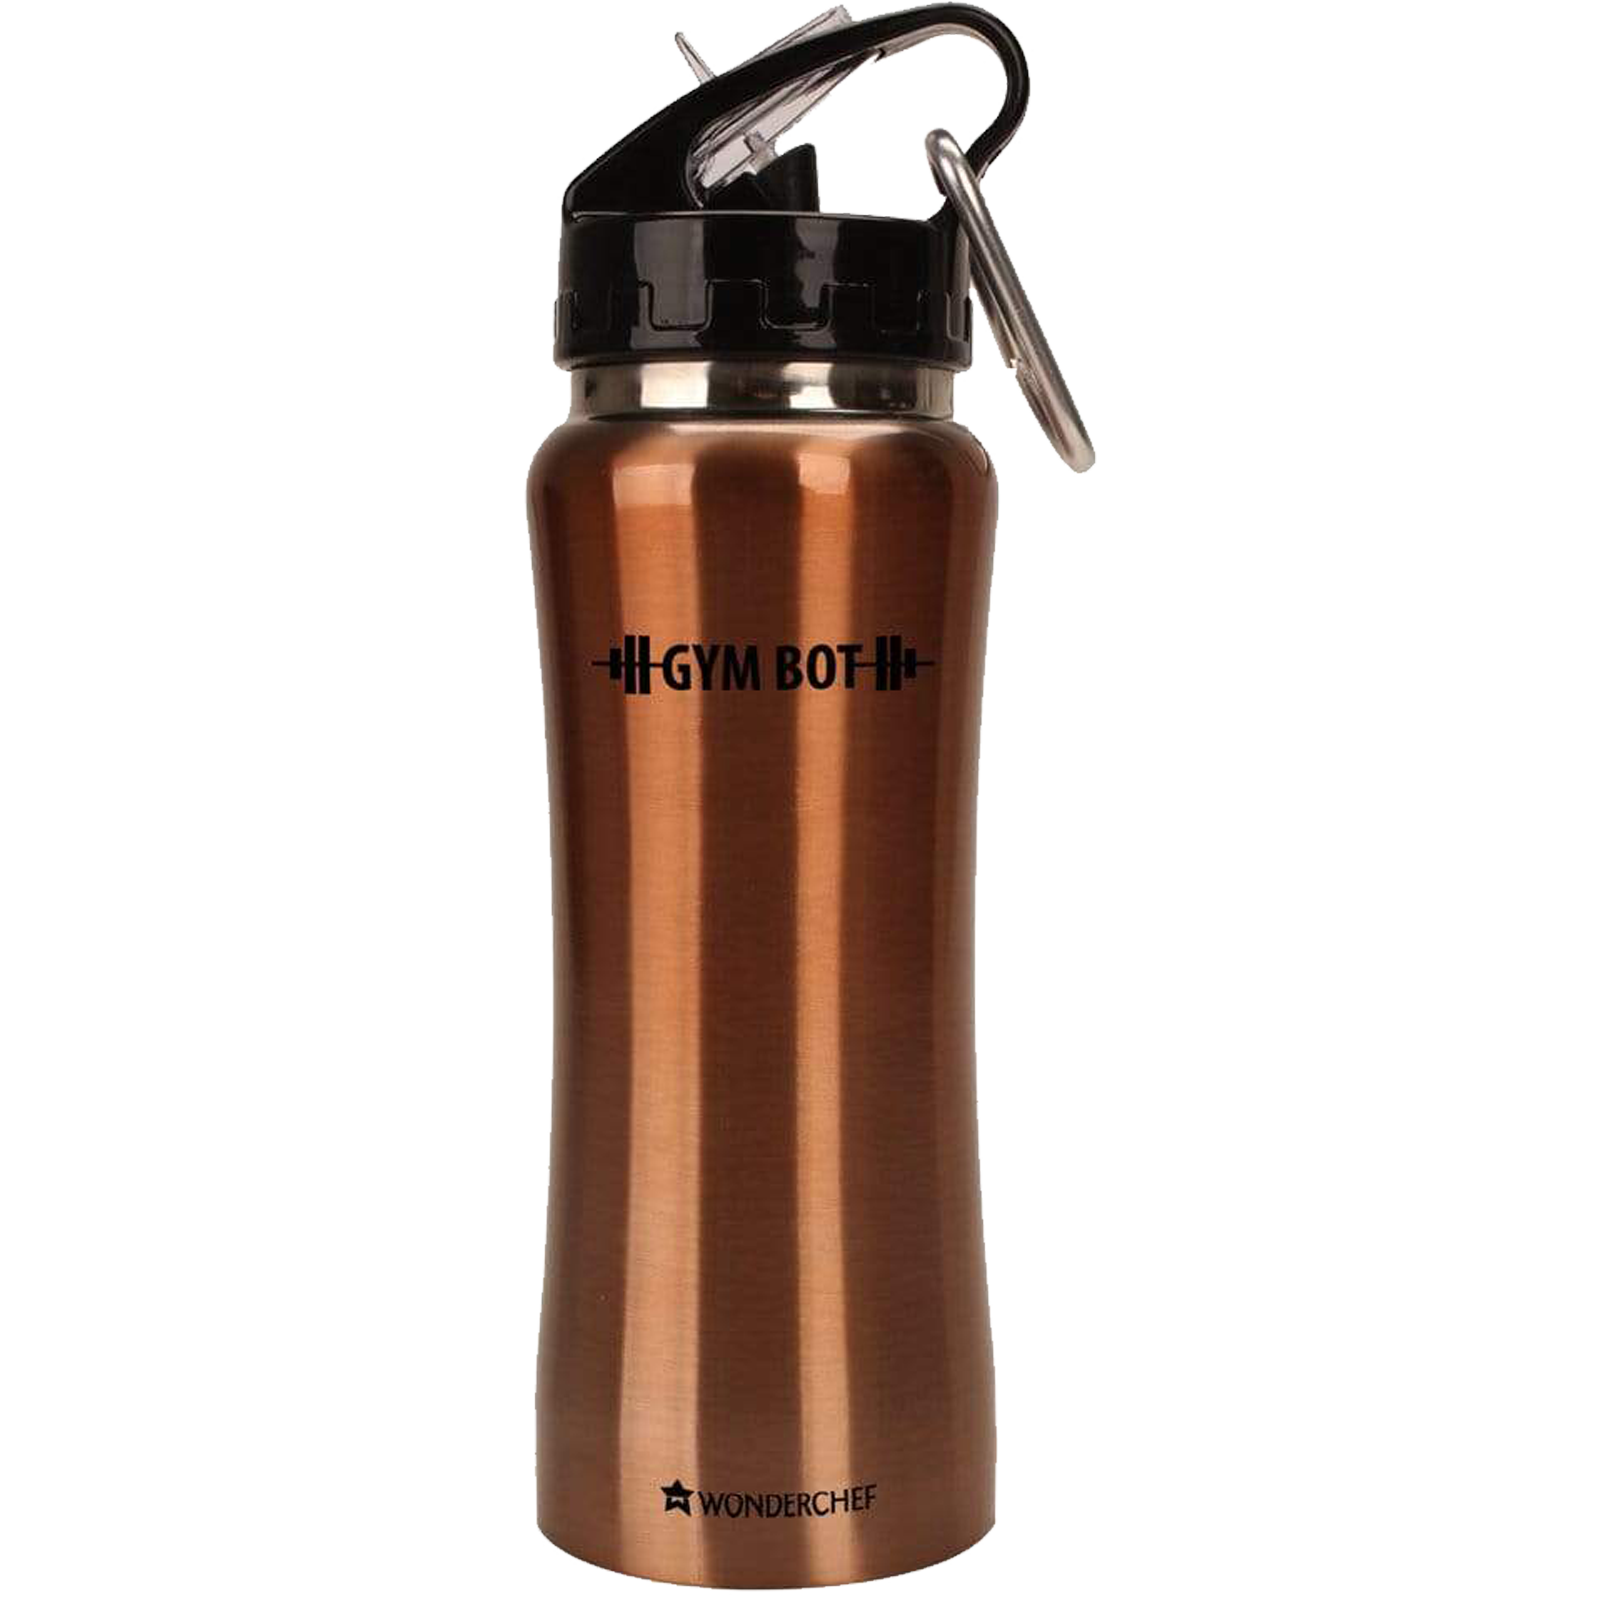 Wonderchef Gym-Bot 0.5 Litres Stainless Steel Water Bottle (Spill and Leak Proof, 63153152, Copper)_1